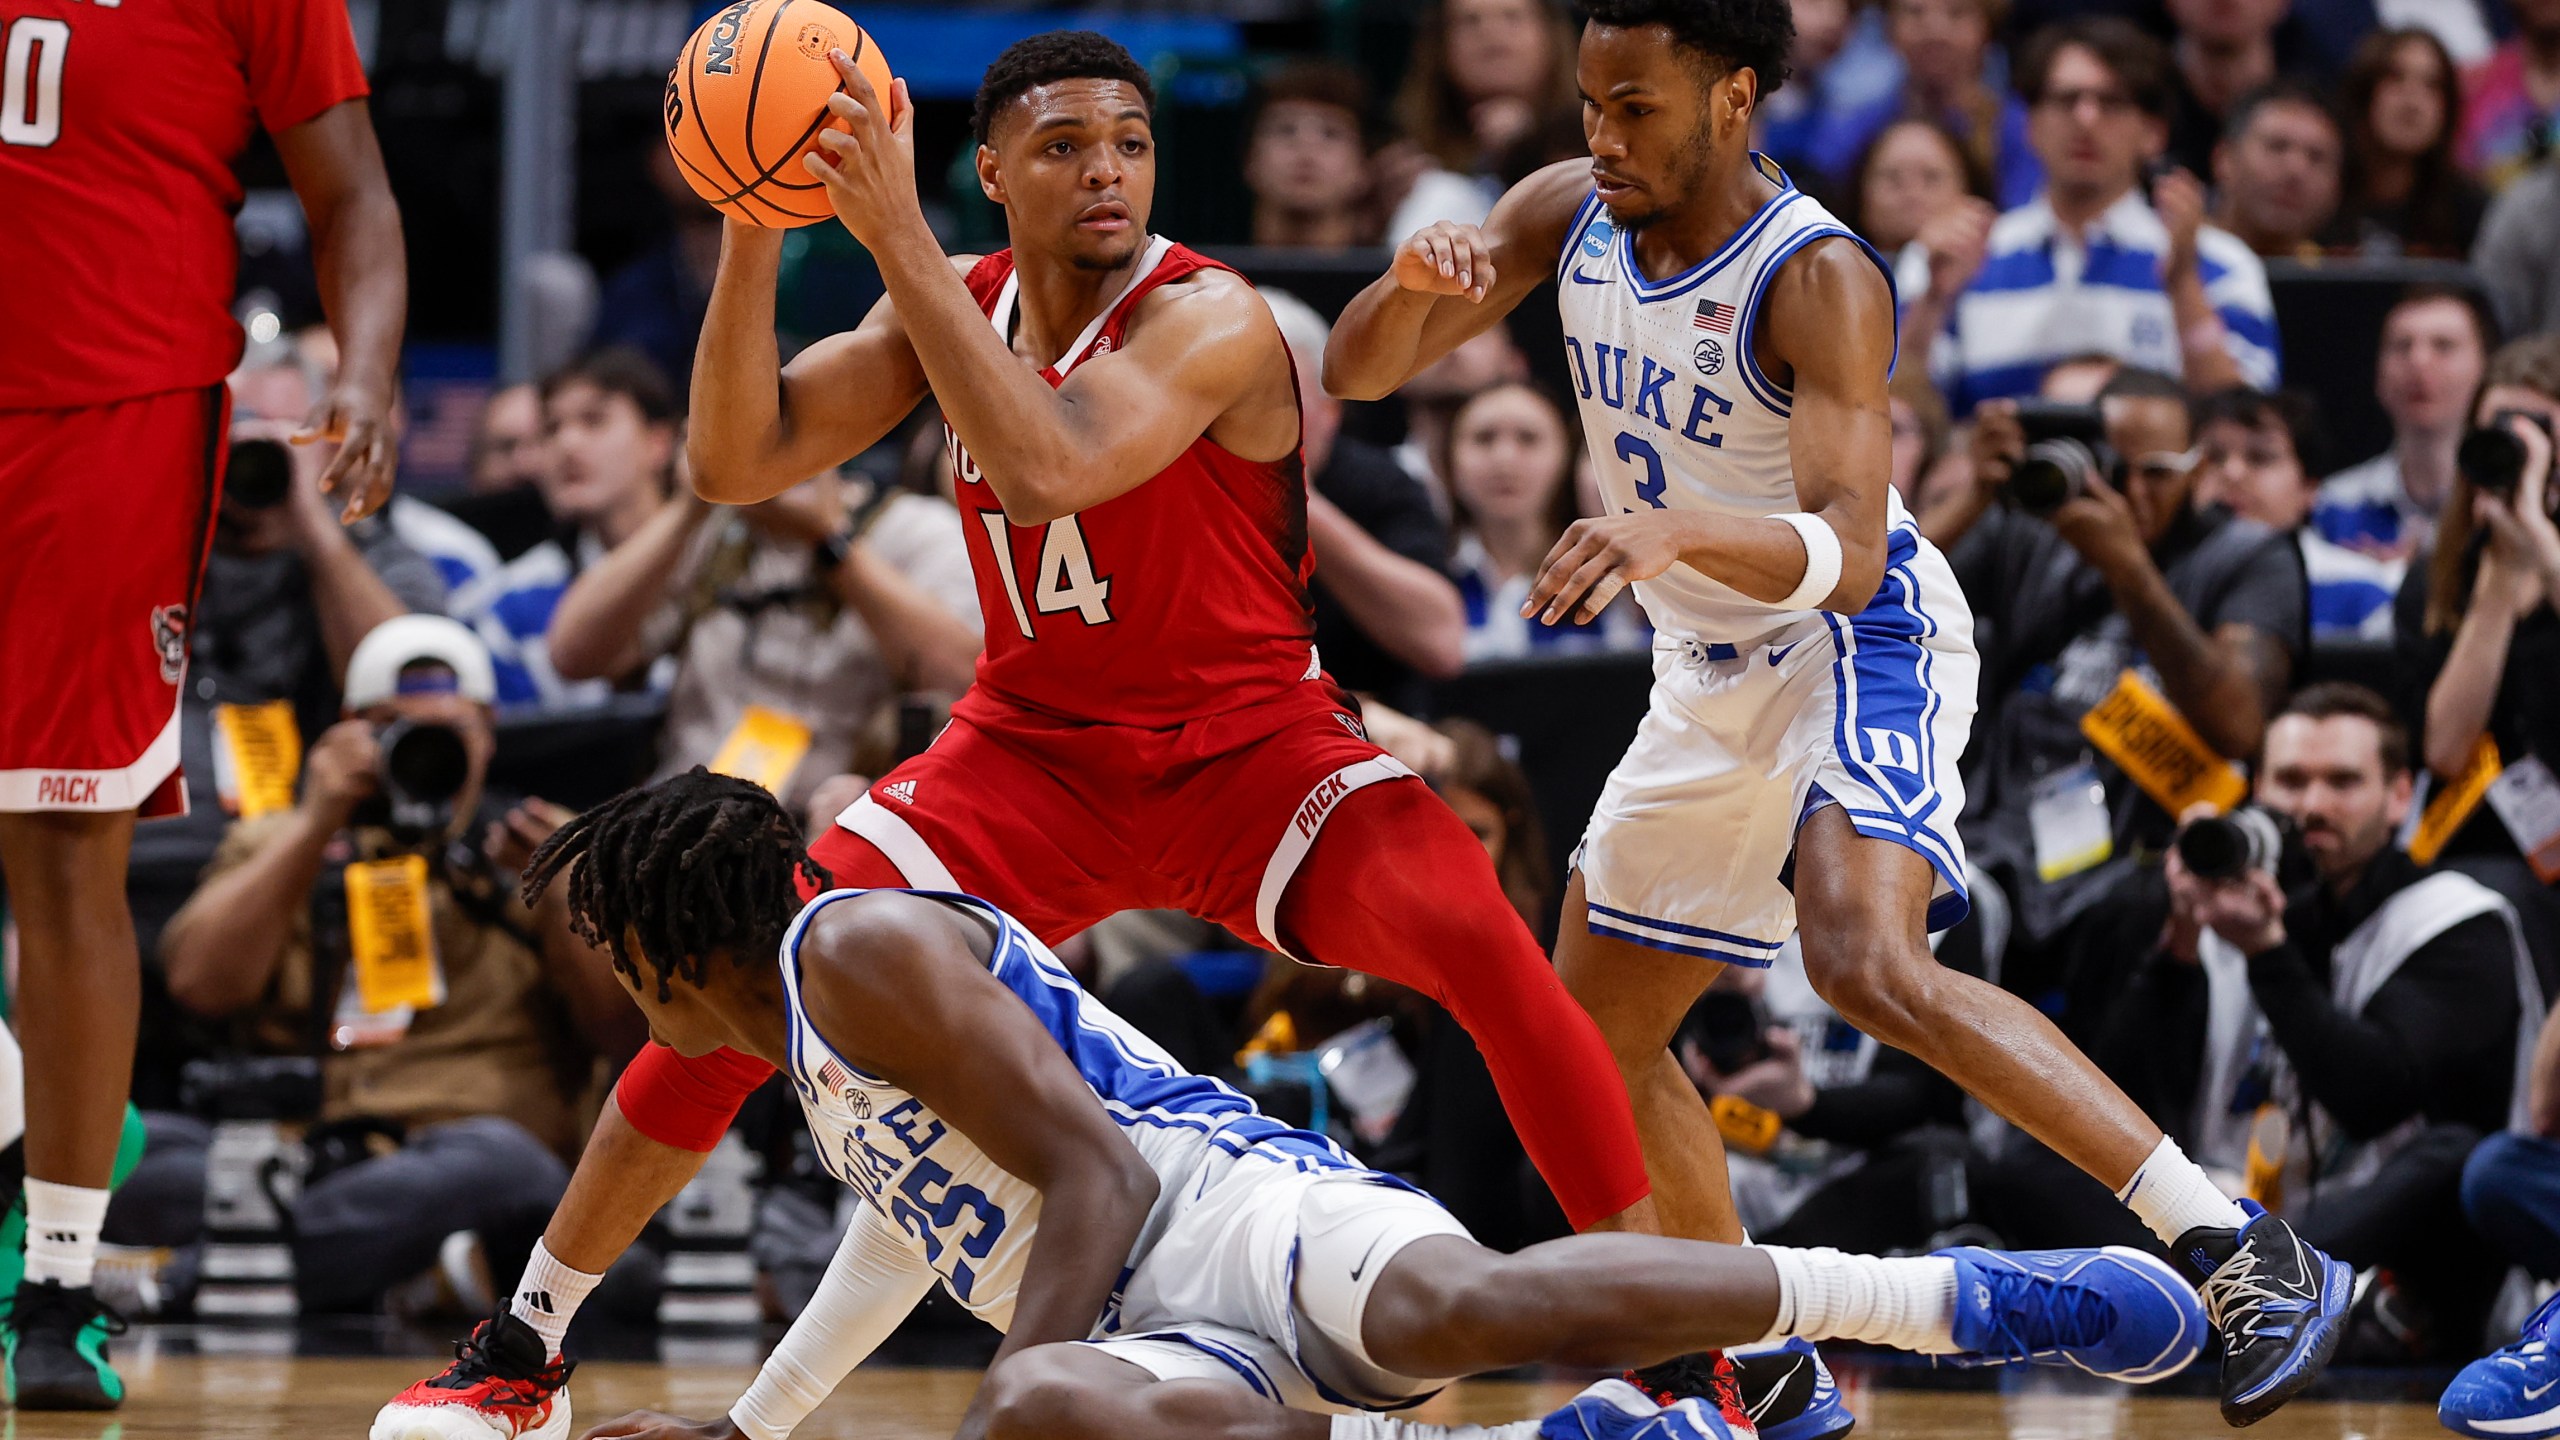 North Carolina State's Casey Morsell (14) keeps control of the ball while being pressured by Duke's Mark Mitchell (25) and Jeremy Roach (3) during the first half of an Elite Eight college basketball game in the NCAA Tournament in Dallas, Sunday, March 31, 2024. (AP Photo/Brandon Wade)